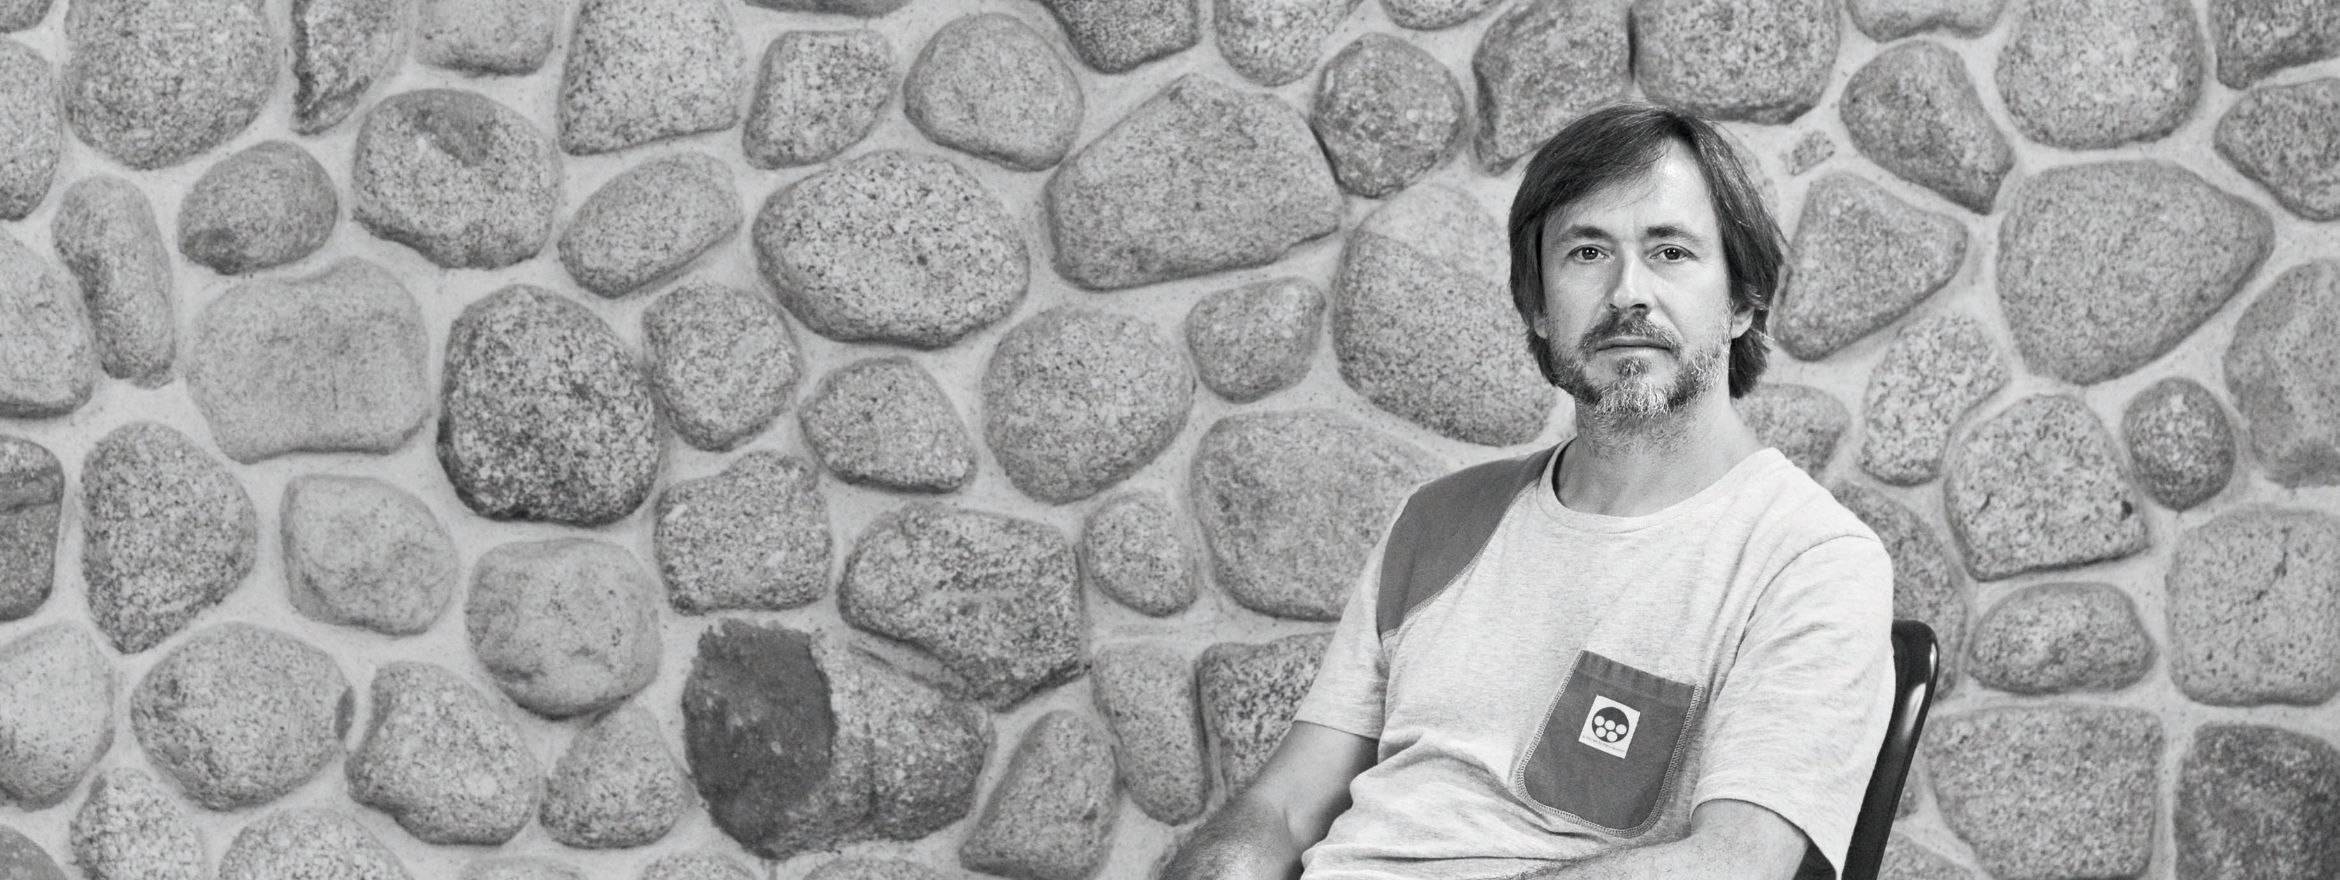 Who is Marc Newson?